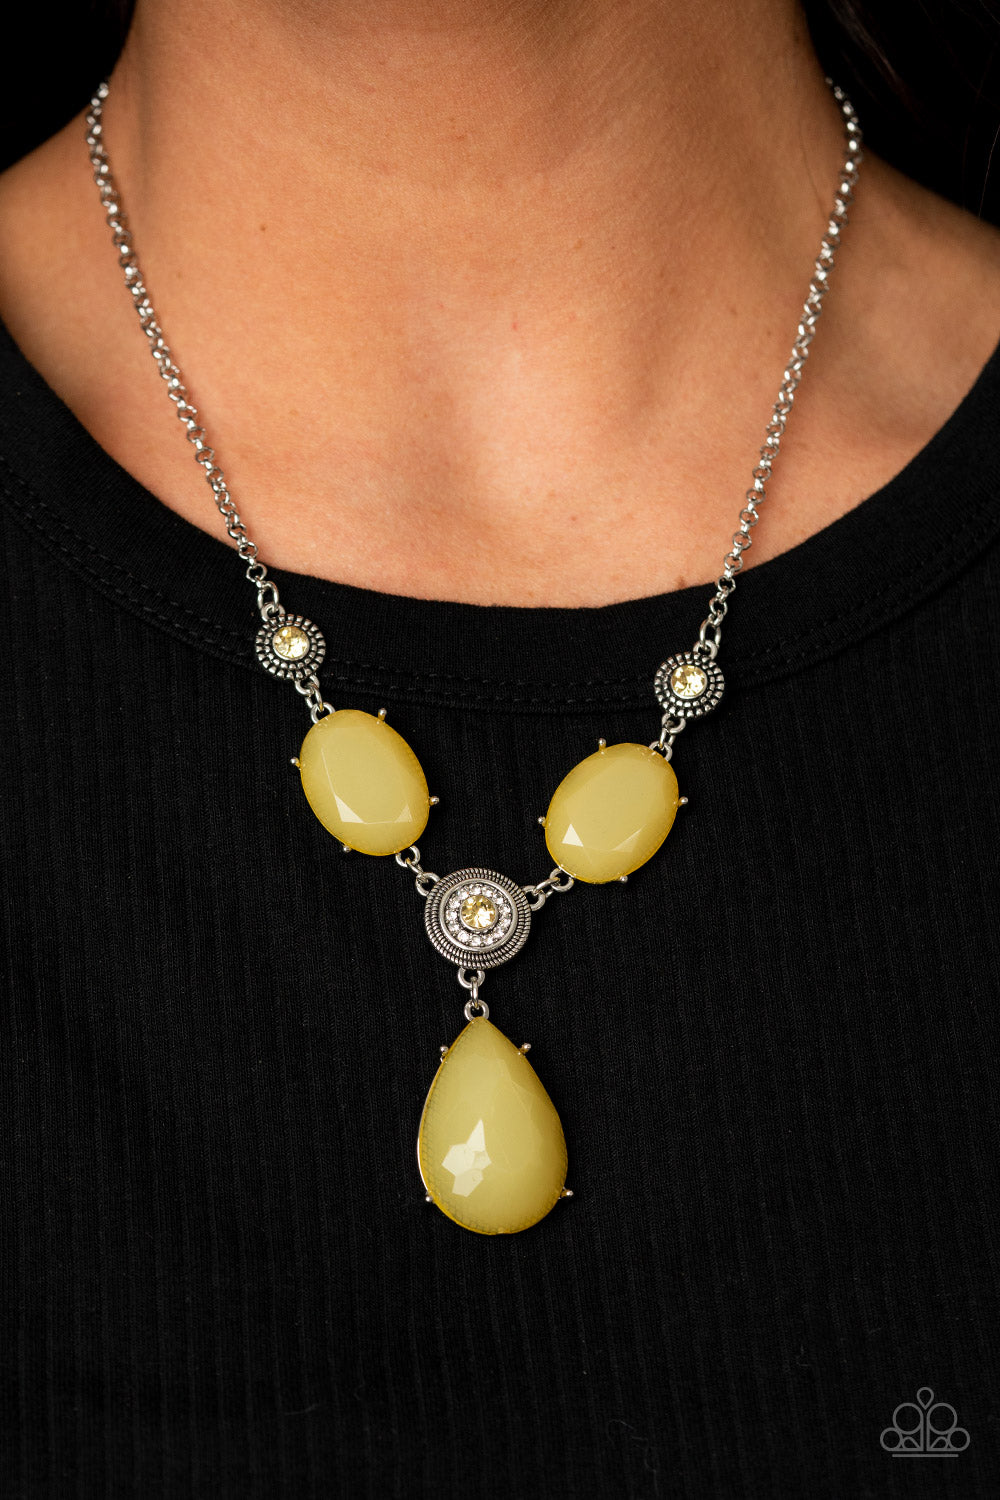 Heirloom Hideaway - Yellow Necklace - Sabrina's Bling Collection